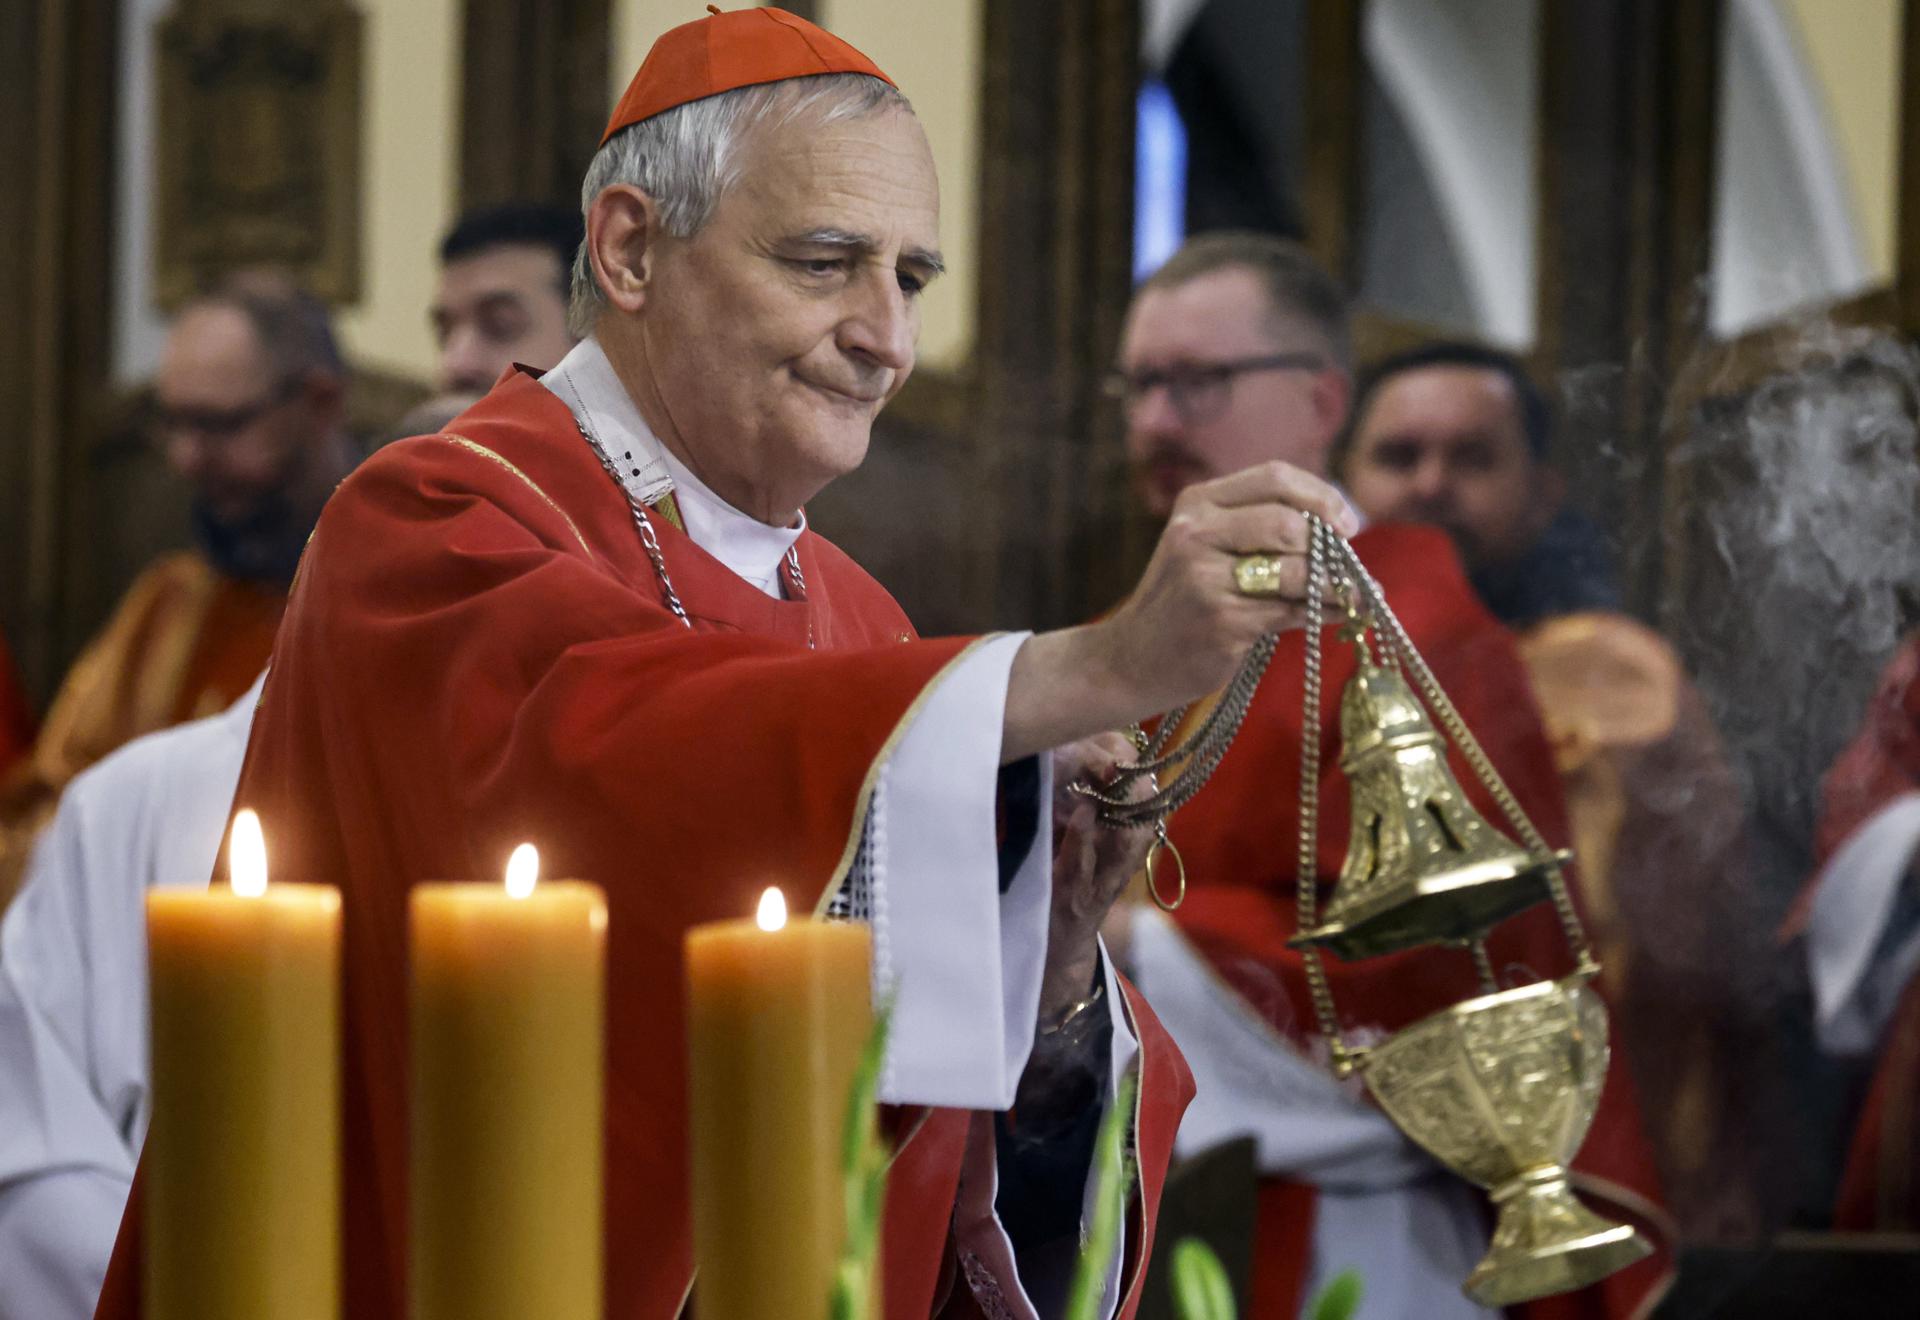 Cardinal Matteo Zuppi, Pope's envoy for the Ukrainian settlement, celebrates a Holy Mass during the feast of the Apostles Peter and Paul in the Cathedral of the Immaculate Conception of the Blessed Virgin Mary in Moscow, Russia, 29 June 2023. EFE-EPA/SERGEI ILNITSKY